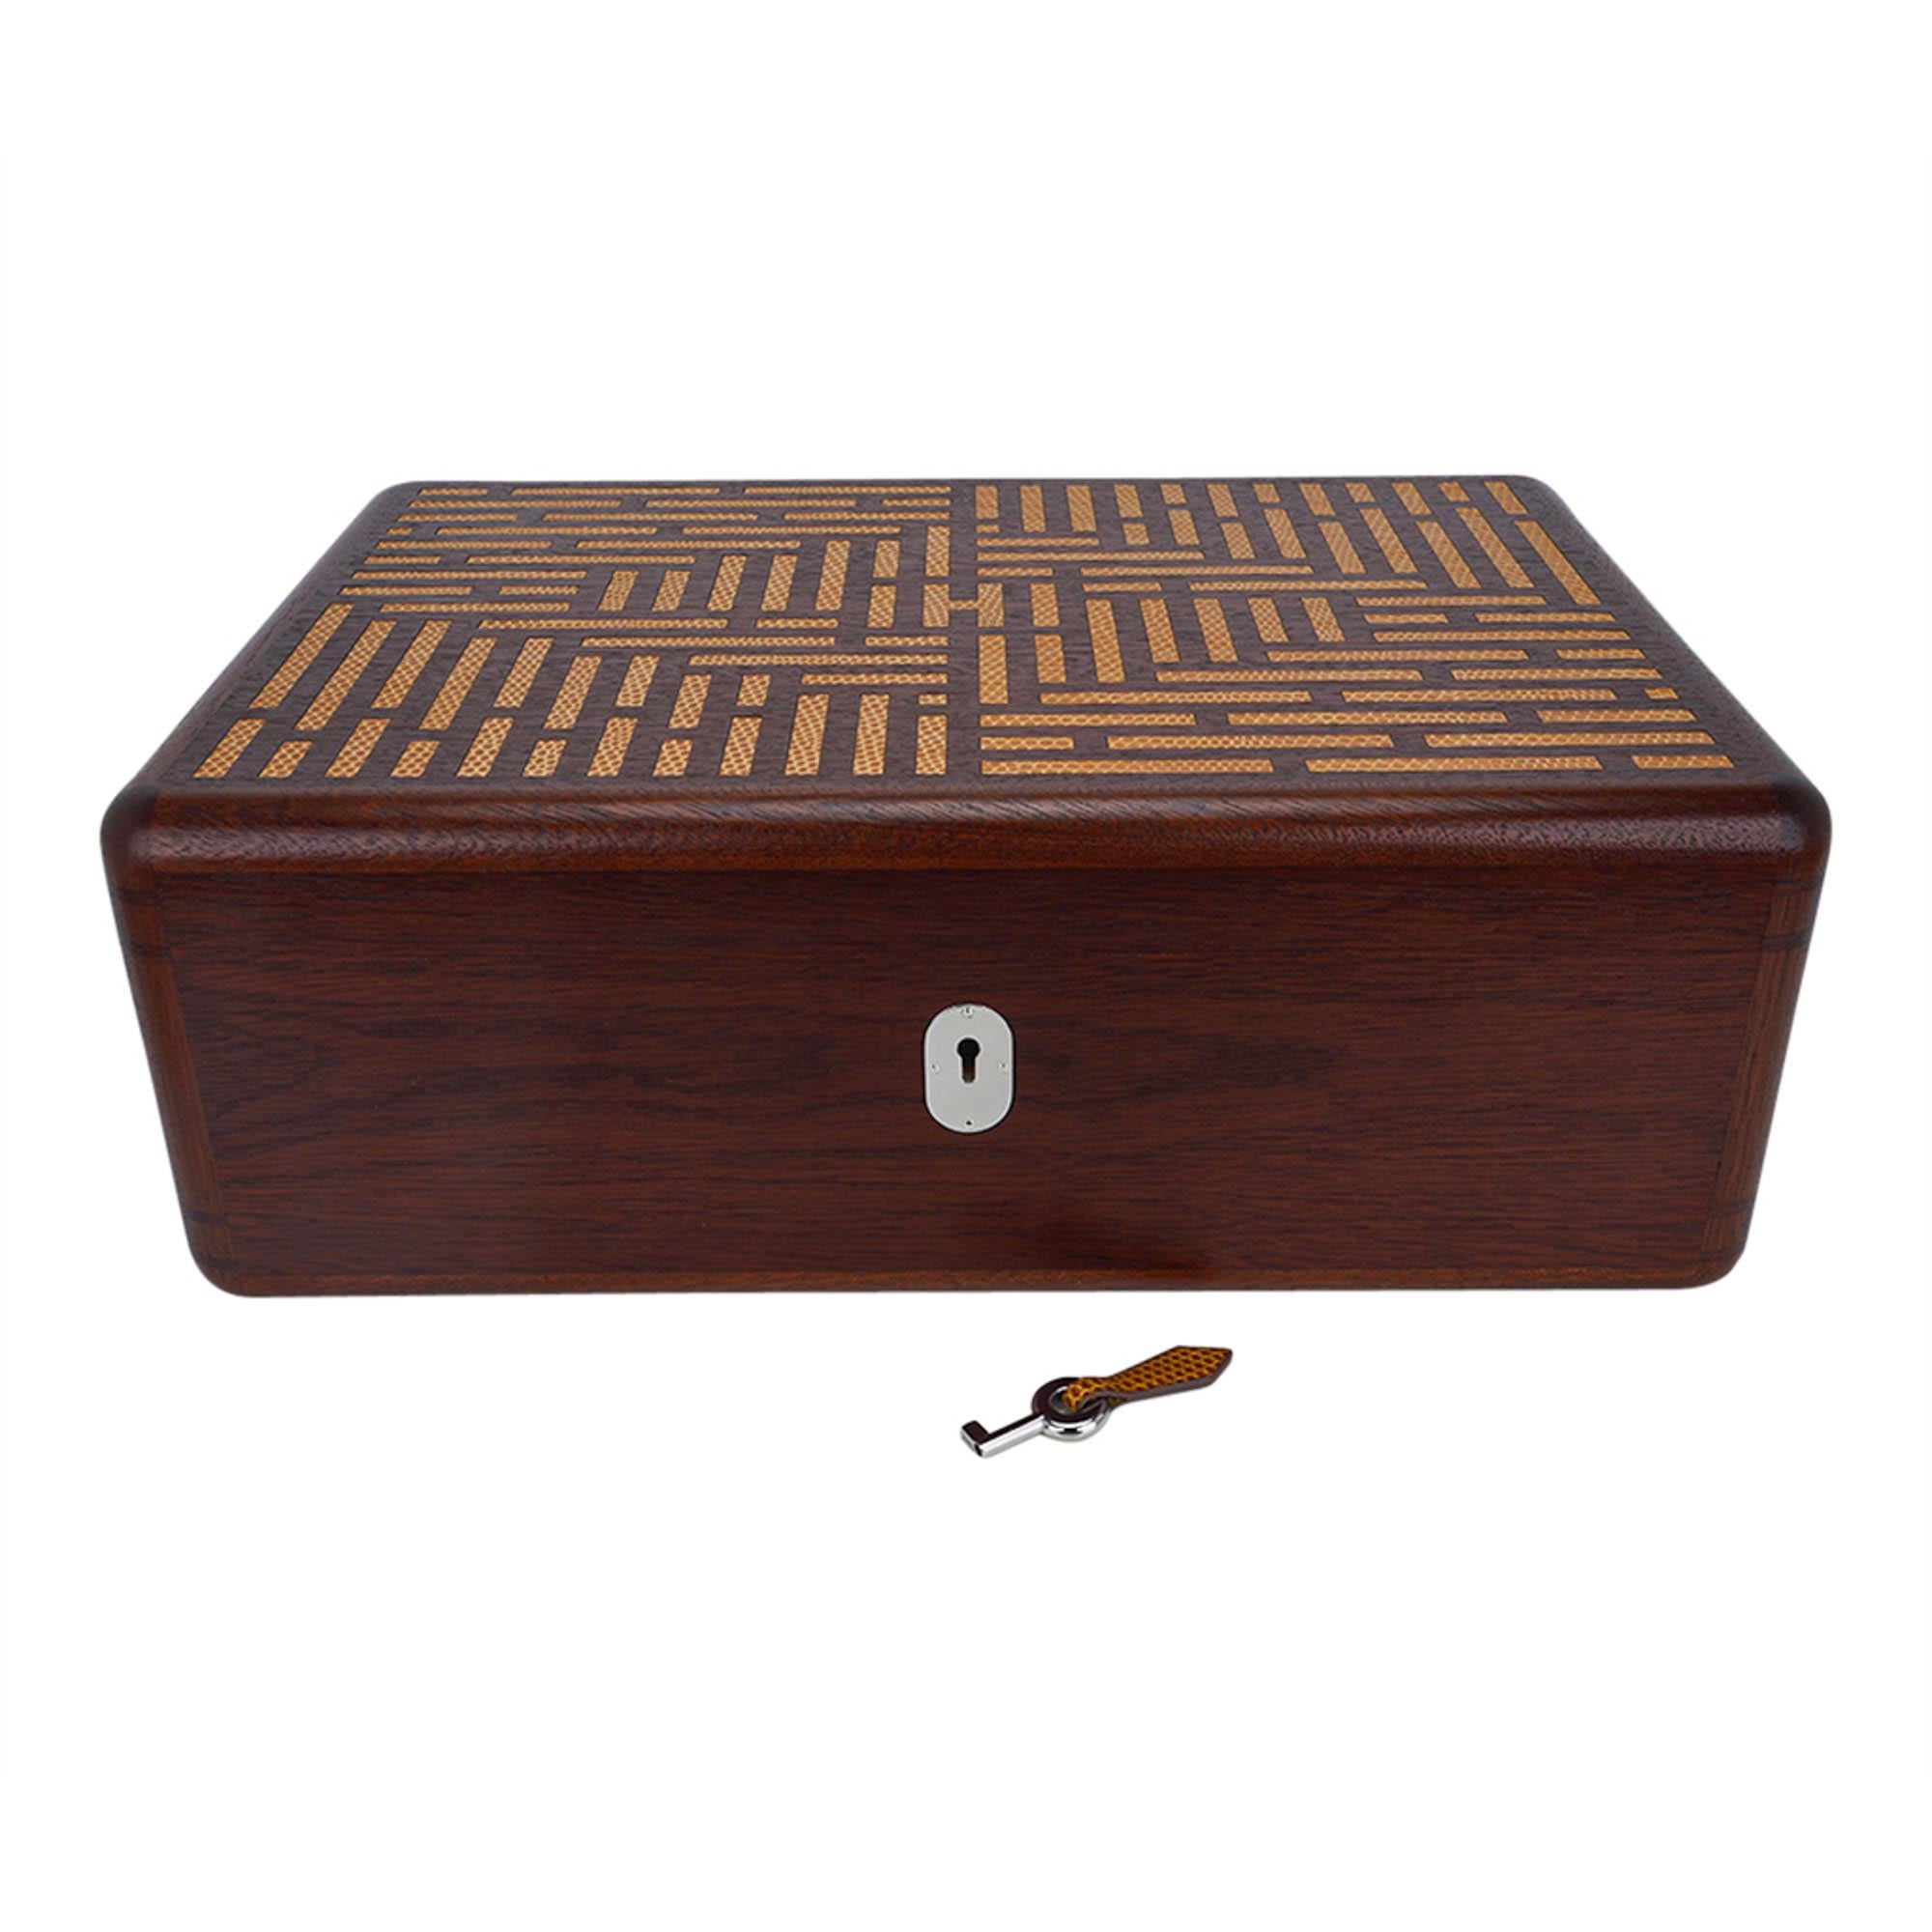 Hermes Coffret a Cigares Humidor Limited Edition Sycamore Wood Sesame Lizard For Sale 12